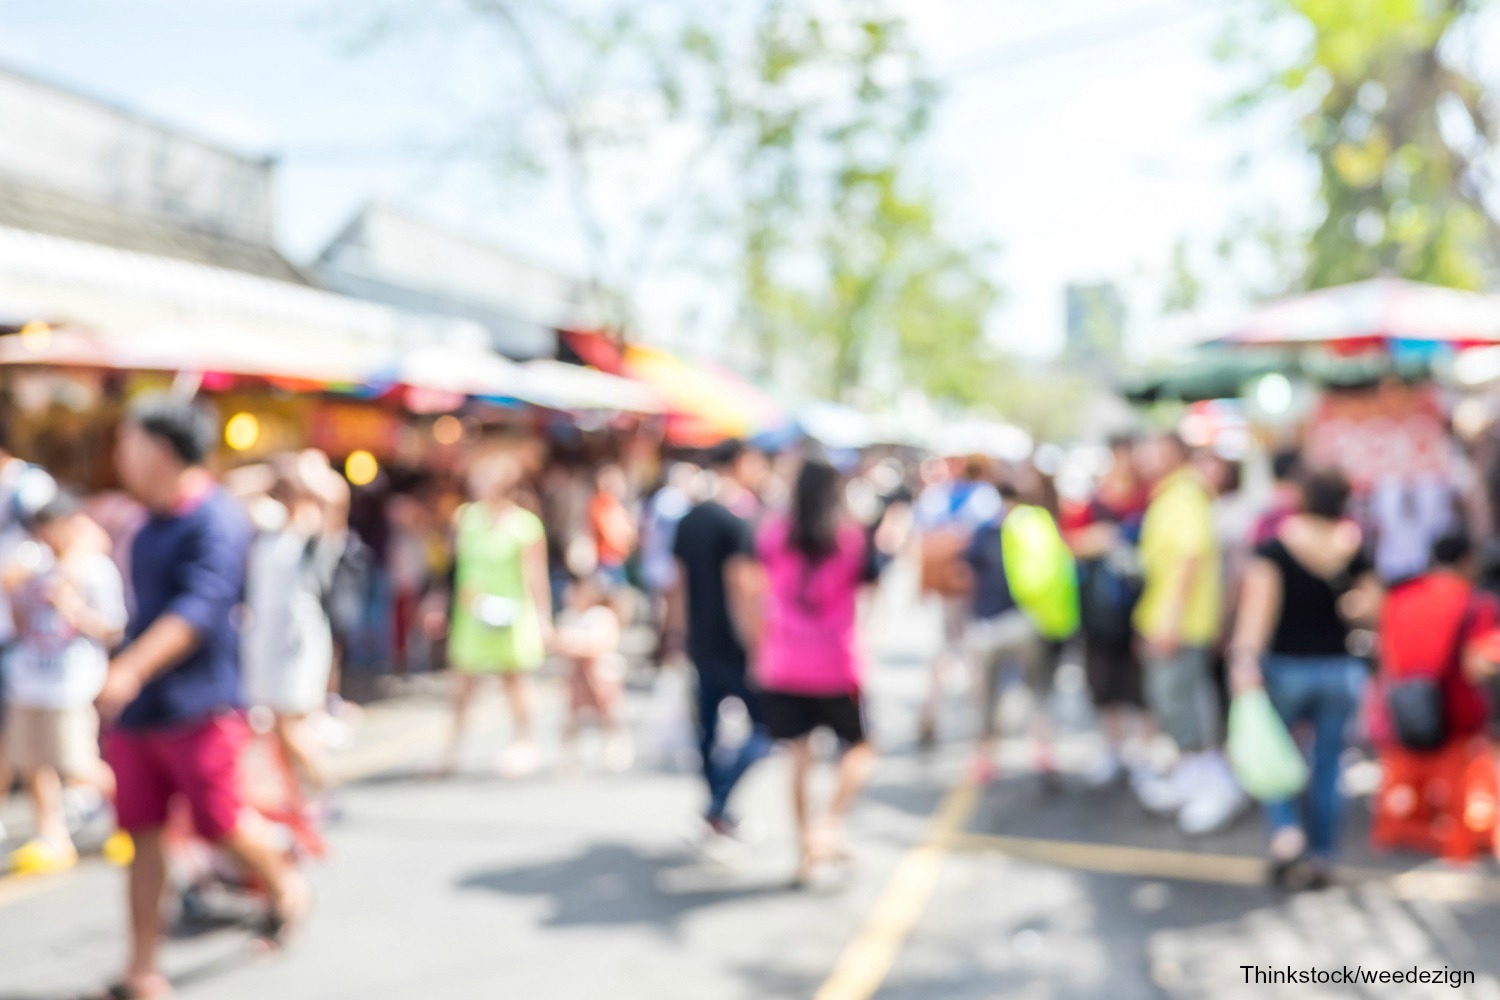 Blurry stock image of a food festival.